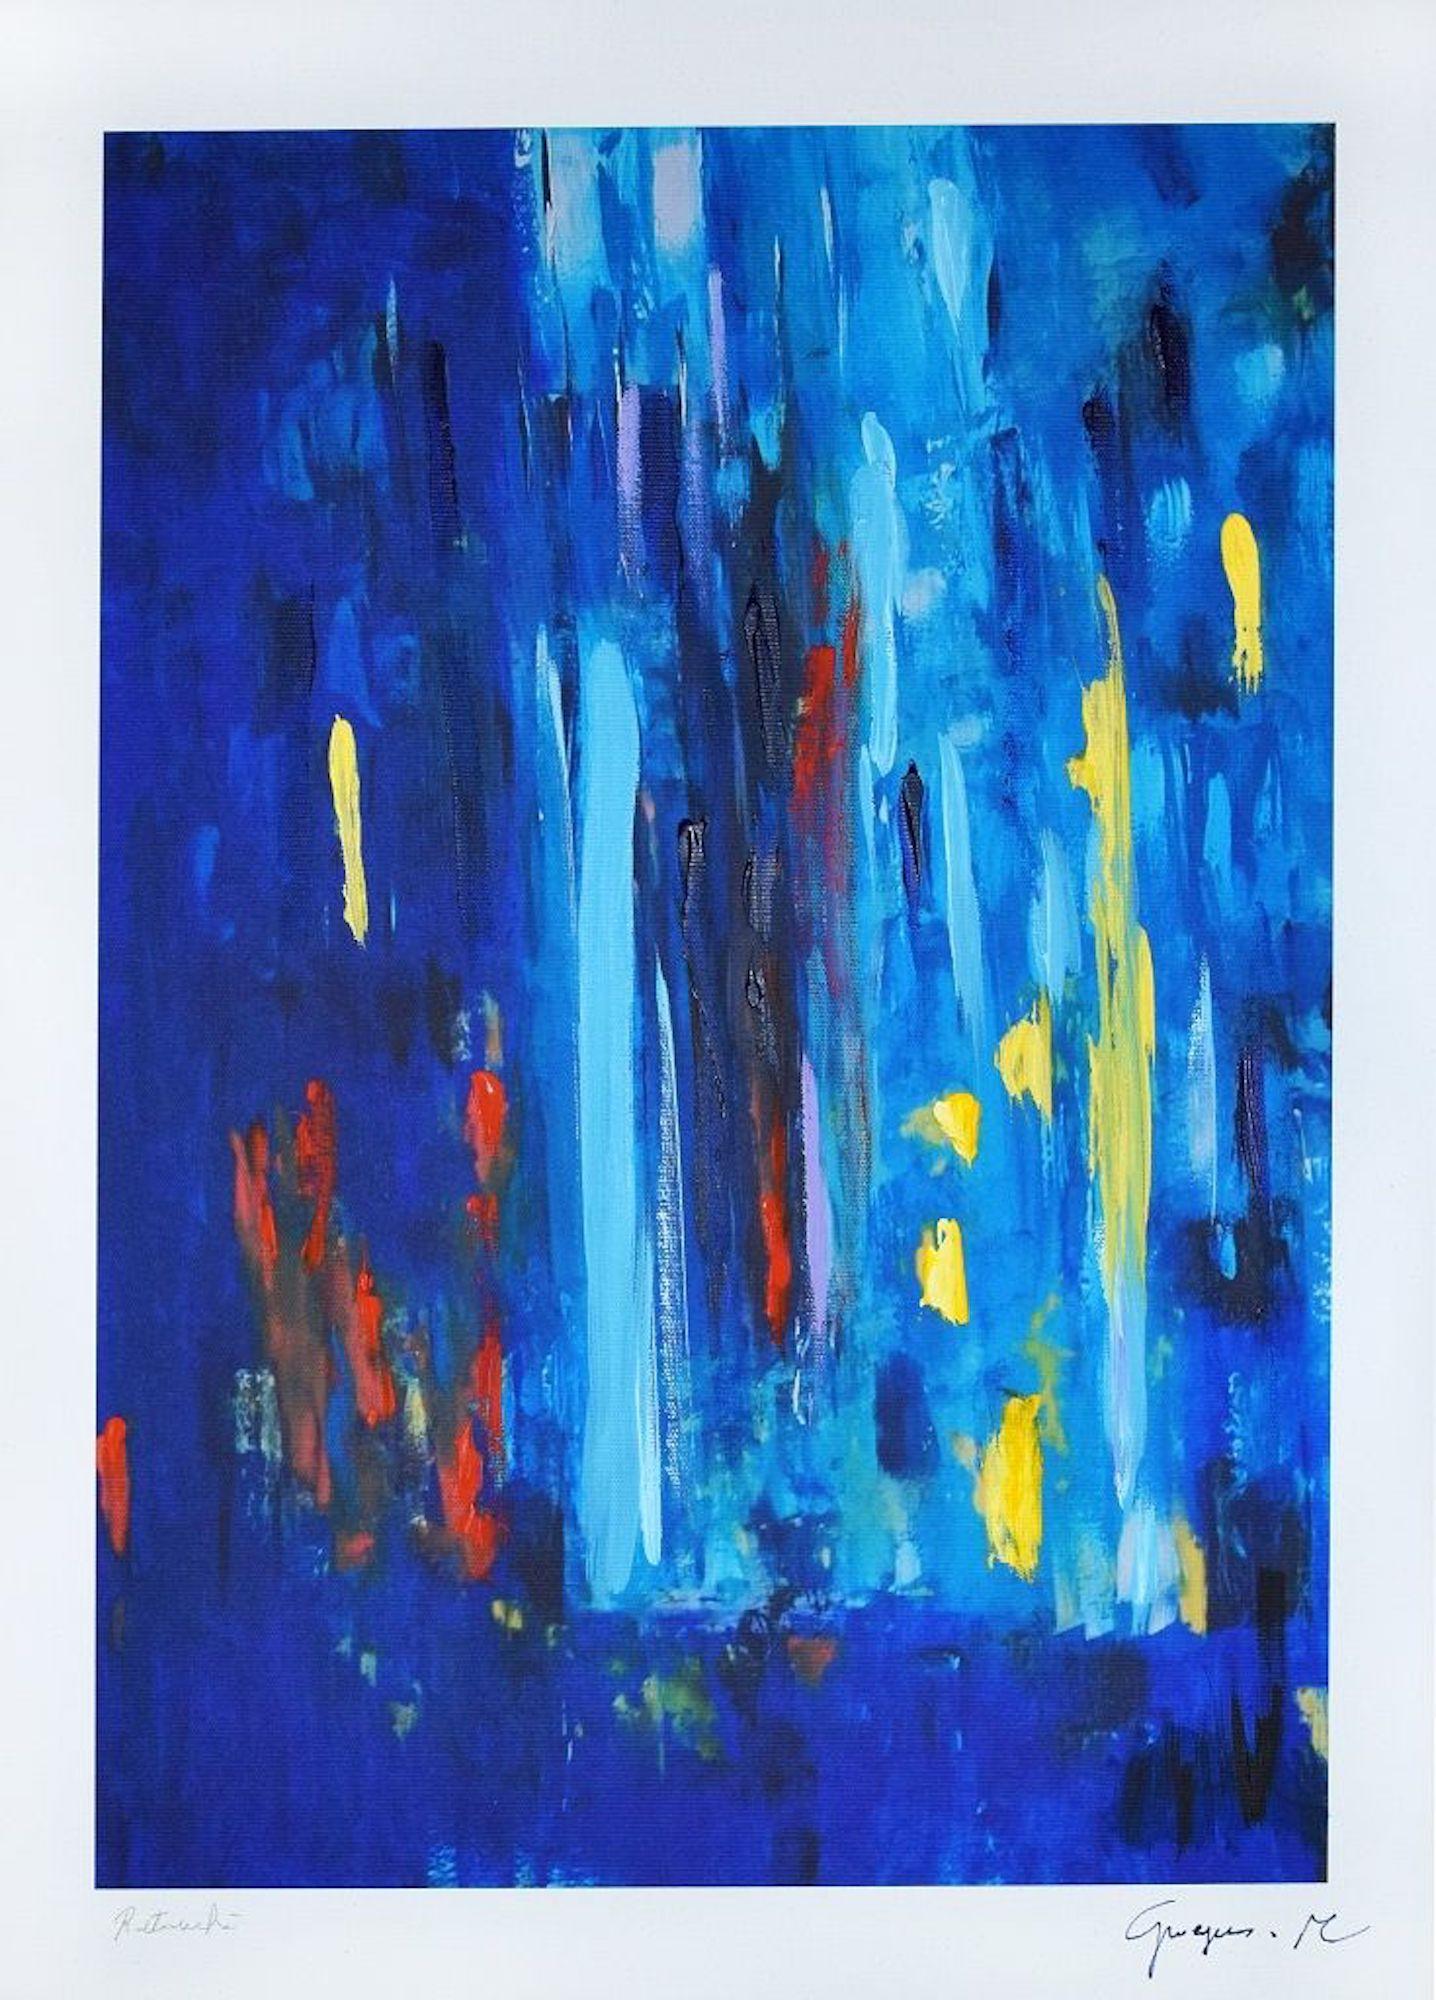 Blue Composition is an original colored esacolor print realized by Martine Goeyens in the 2000s.

The artwork is hand-signed in pen by the artist on the lower right. Hand-retouched by the artist on the lower left margin. Embossed stamp of